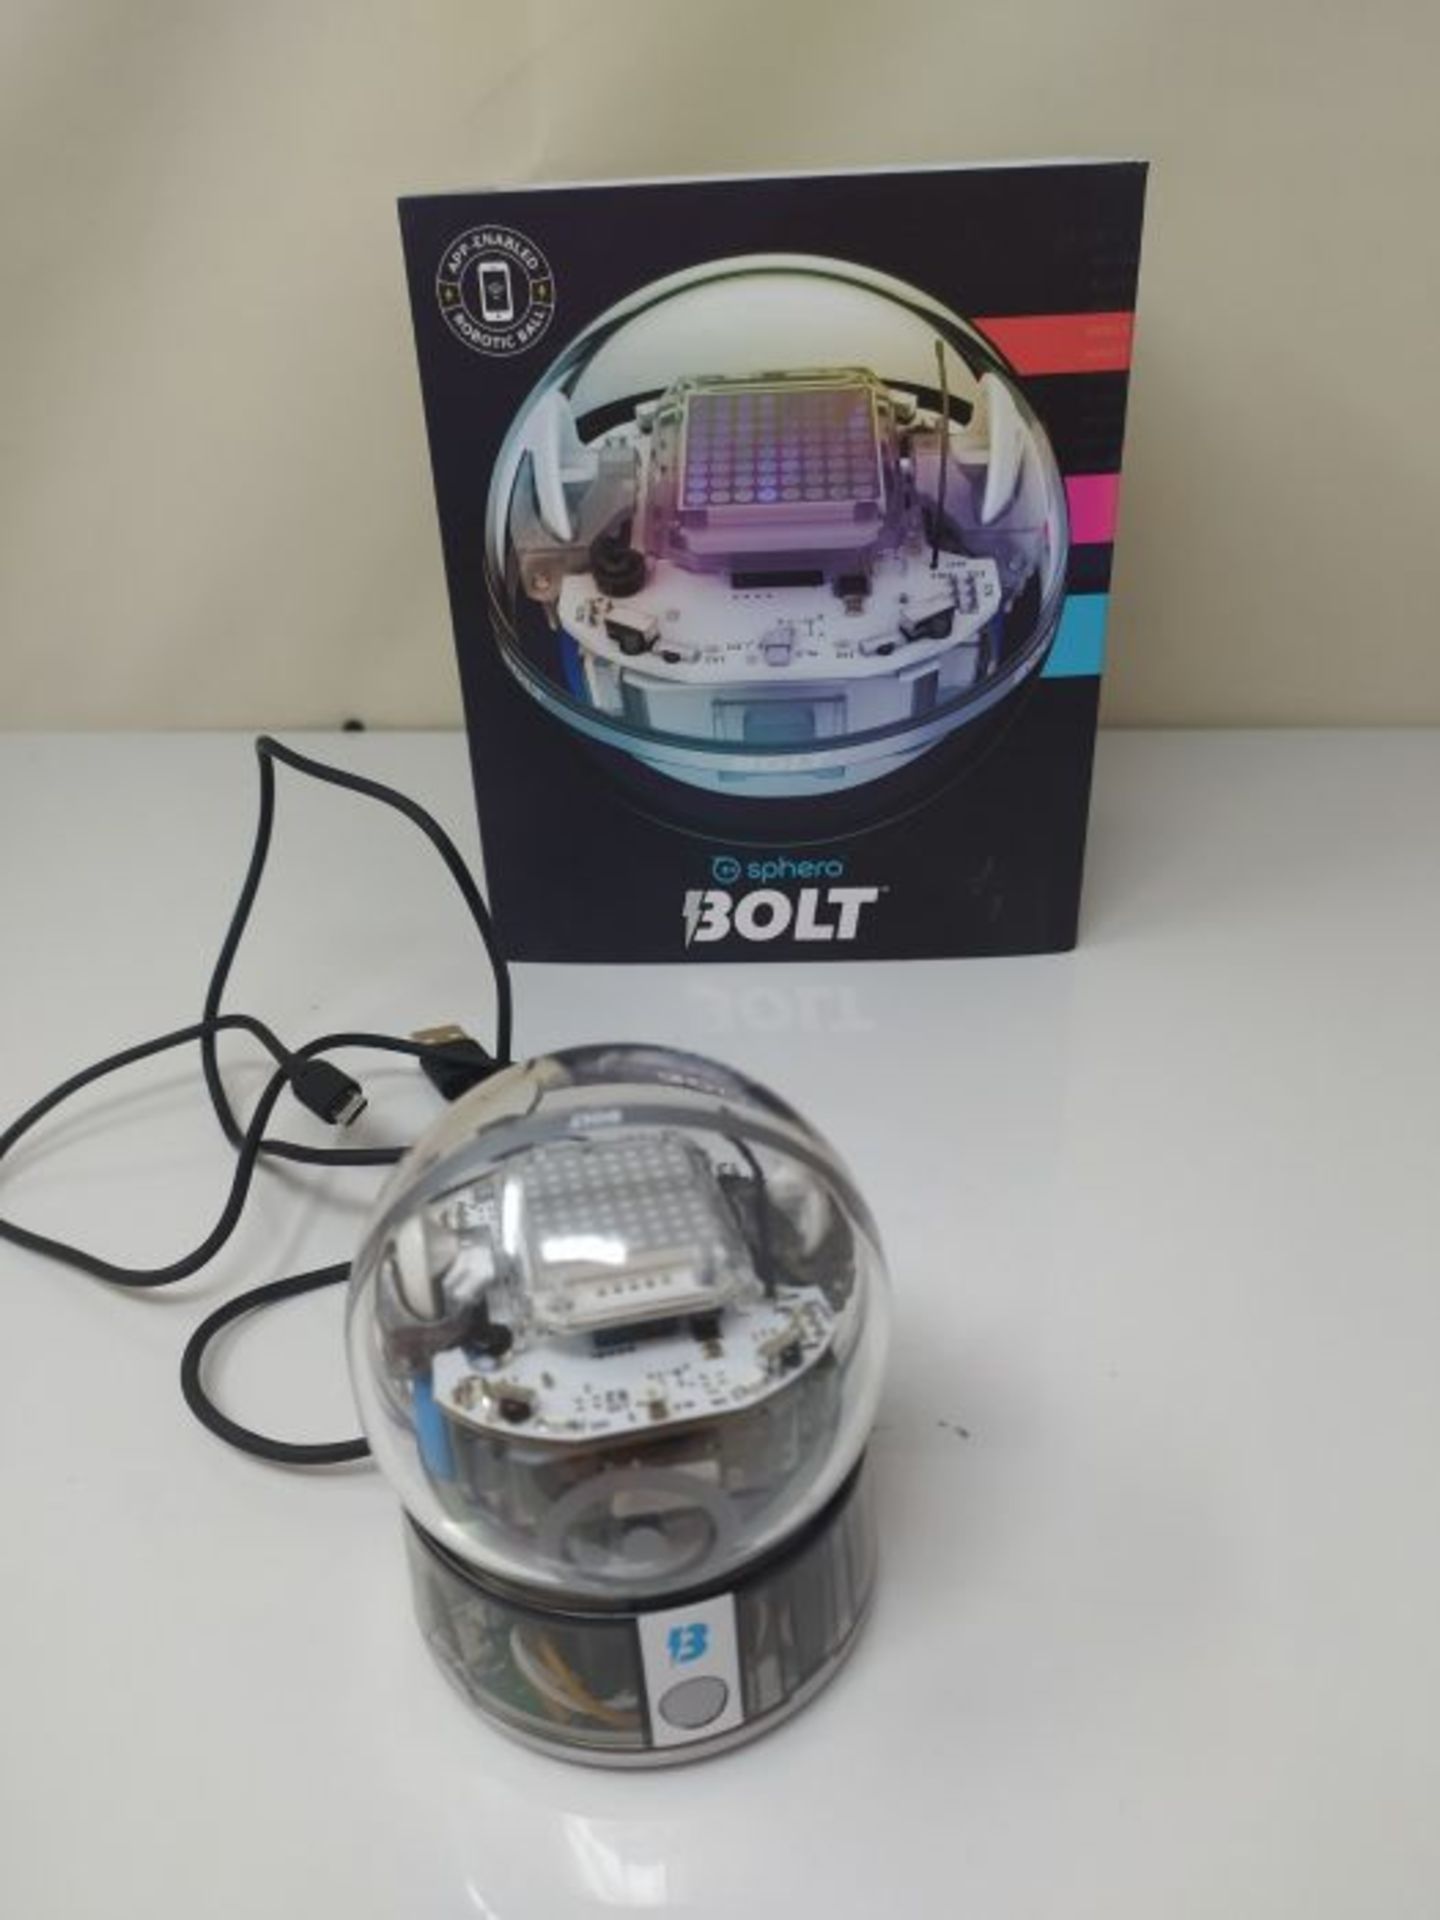 RRP £147.00 Sphero BOLT: App-Enabled Robotic Ball, STEM Learning and Coding for Kids, Programmable - Image 2 of 2